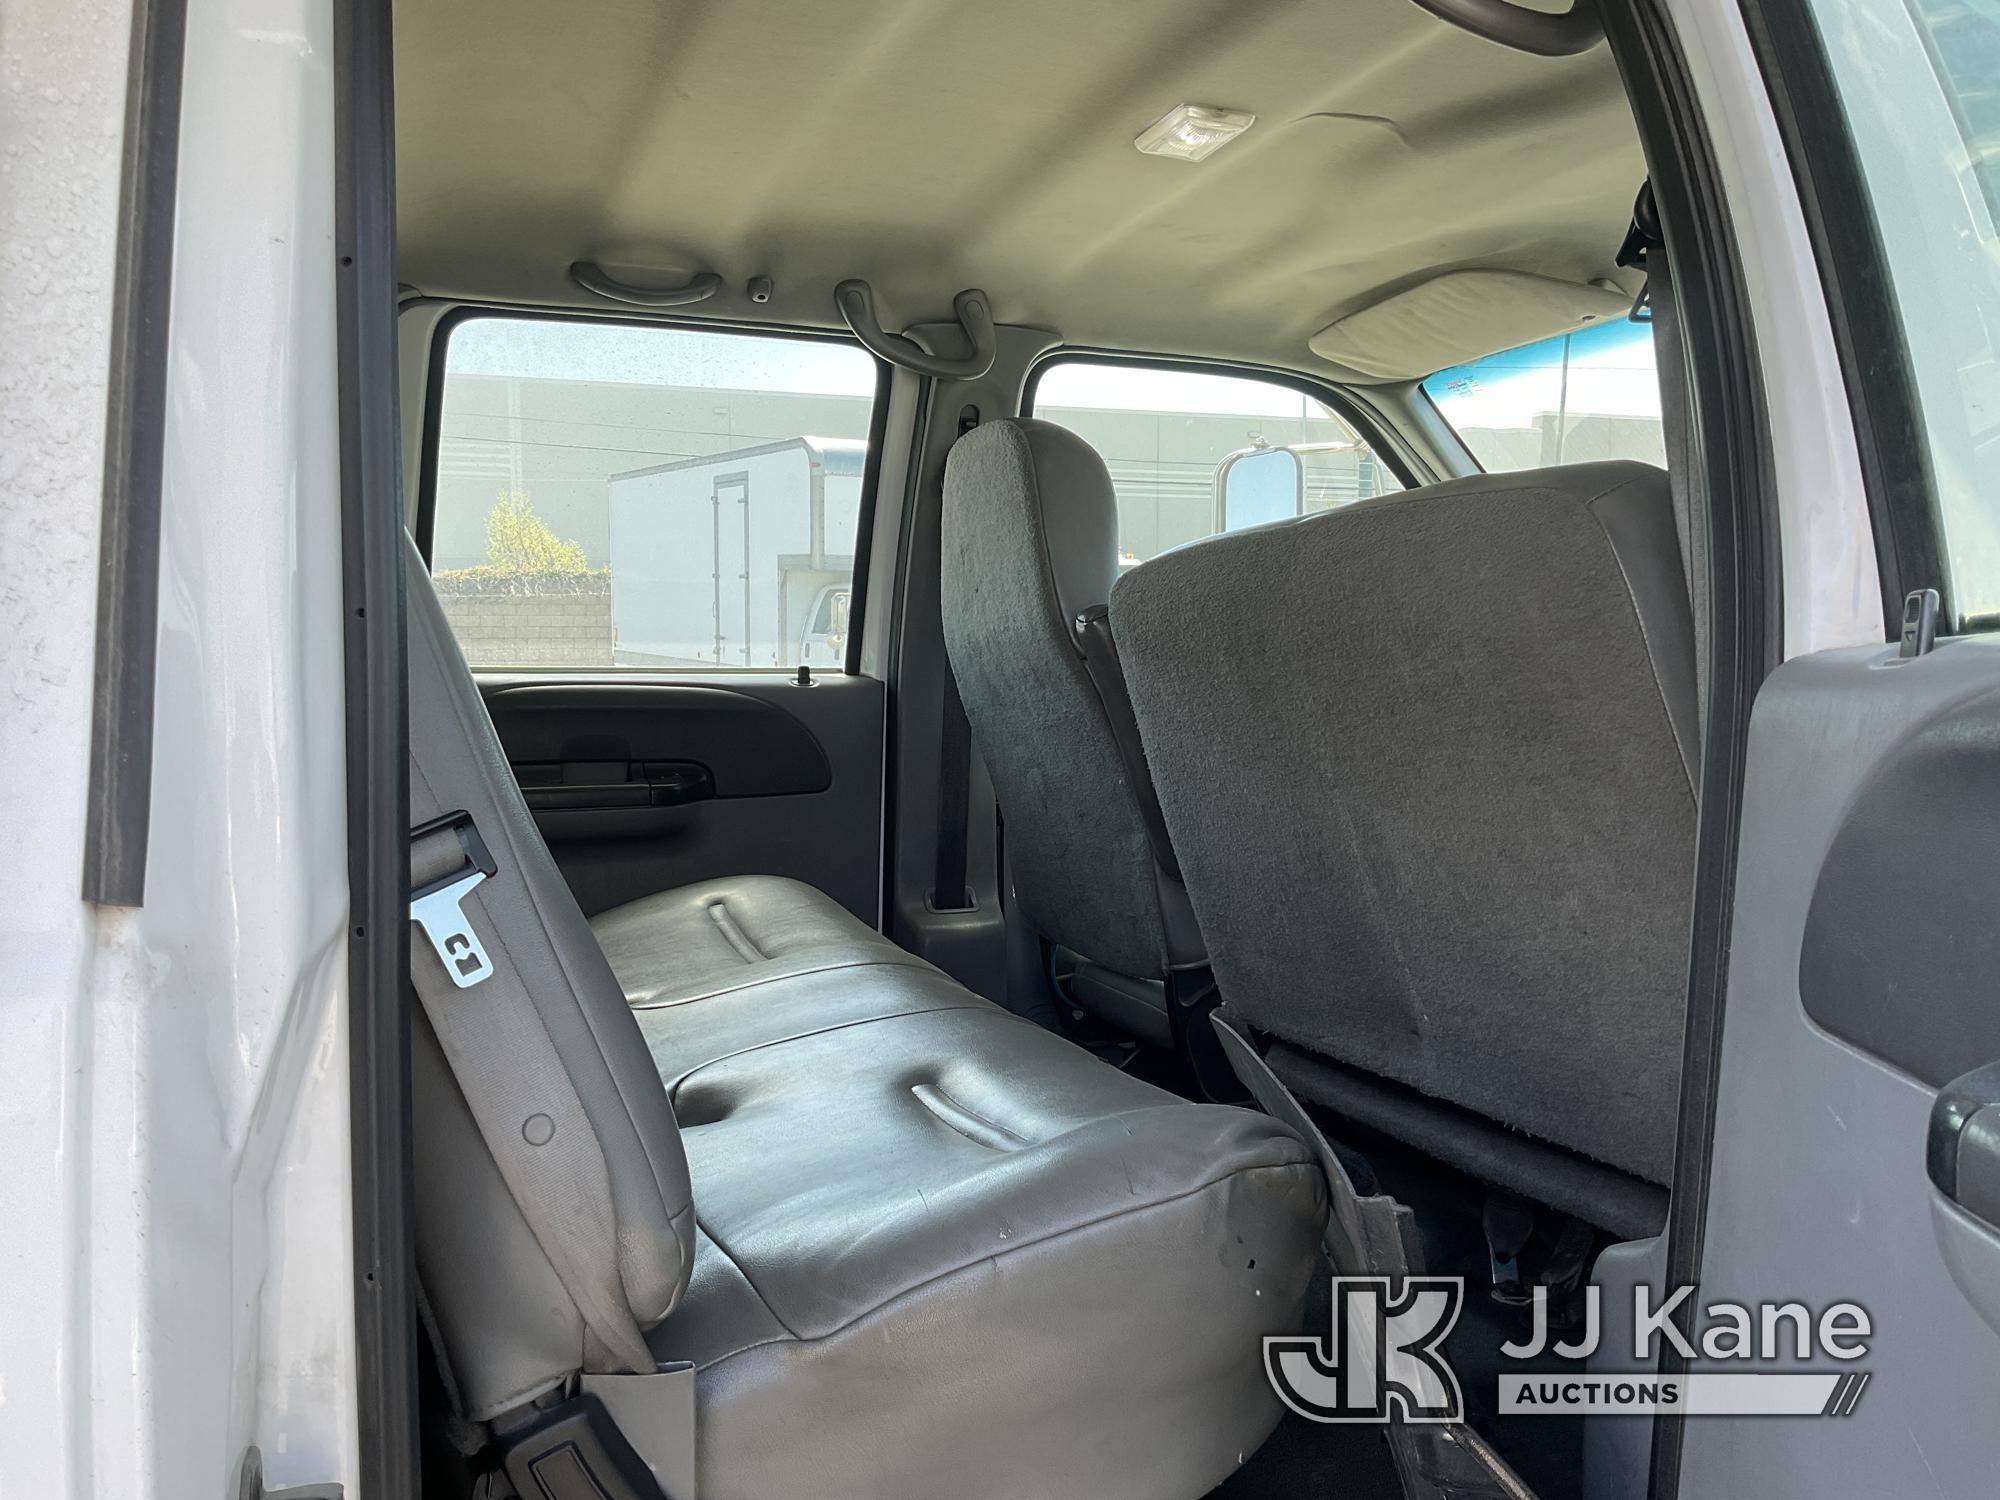 (Jurupa Valley, CA) 2006 Ford F650 Van Body Truck Runs & Moves, Must Be Registered Out Of State Due